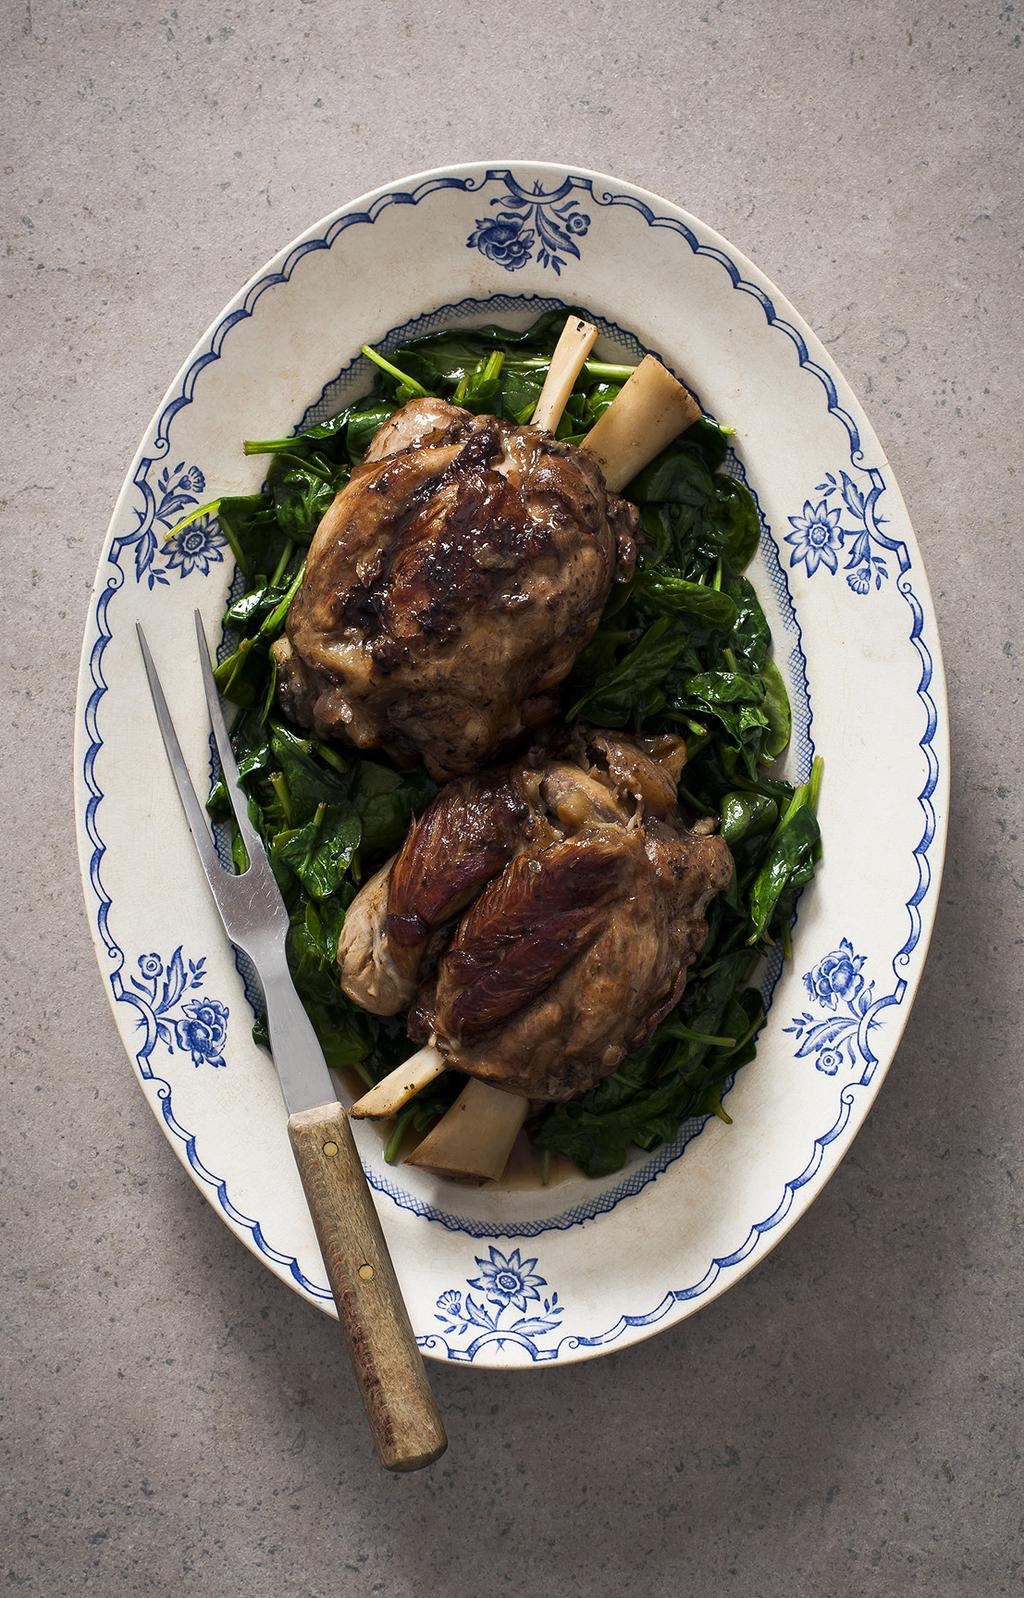 Stinco di maiale al vino rosso con spinaci Pork Shanks in Red Wine with Spinach Serves 4 Preparation: 20 minutes, plus 7 8 hours marinating Cooking: 2 hours 10 minutes 2 pork shanks generous 2 cups